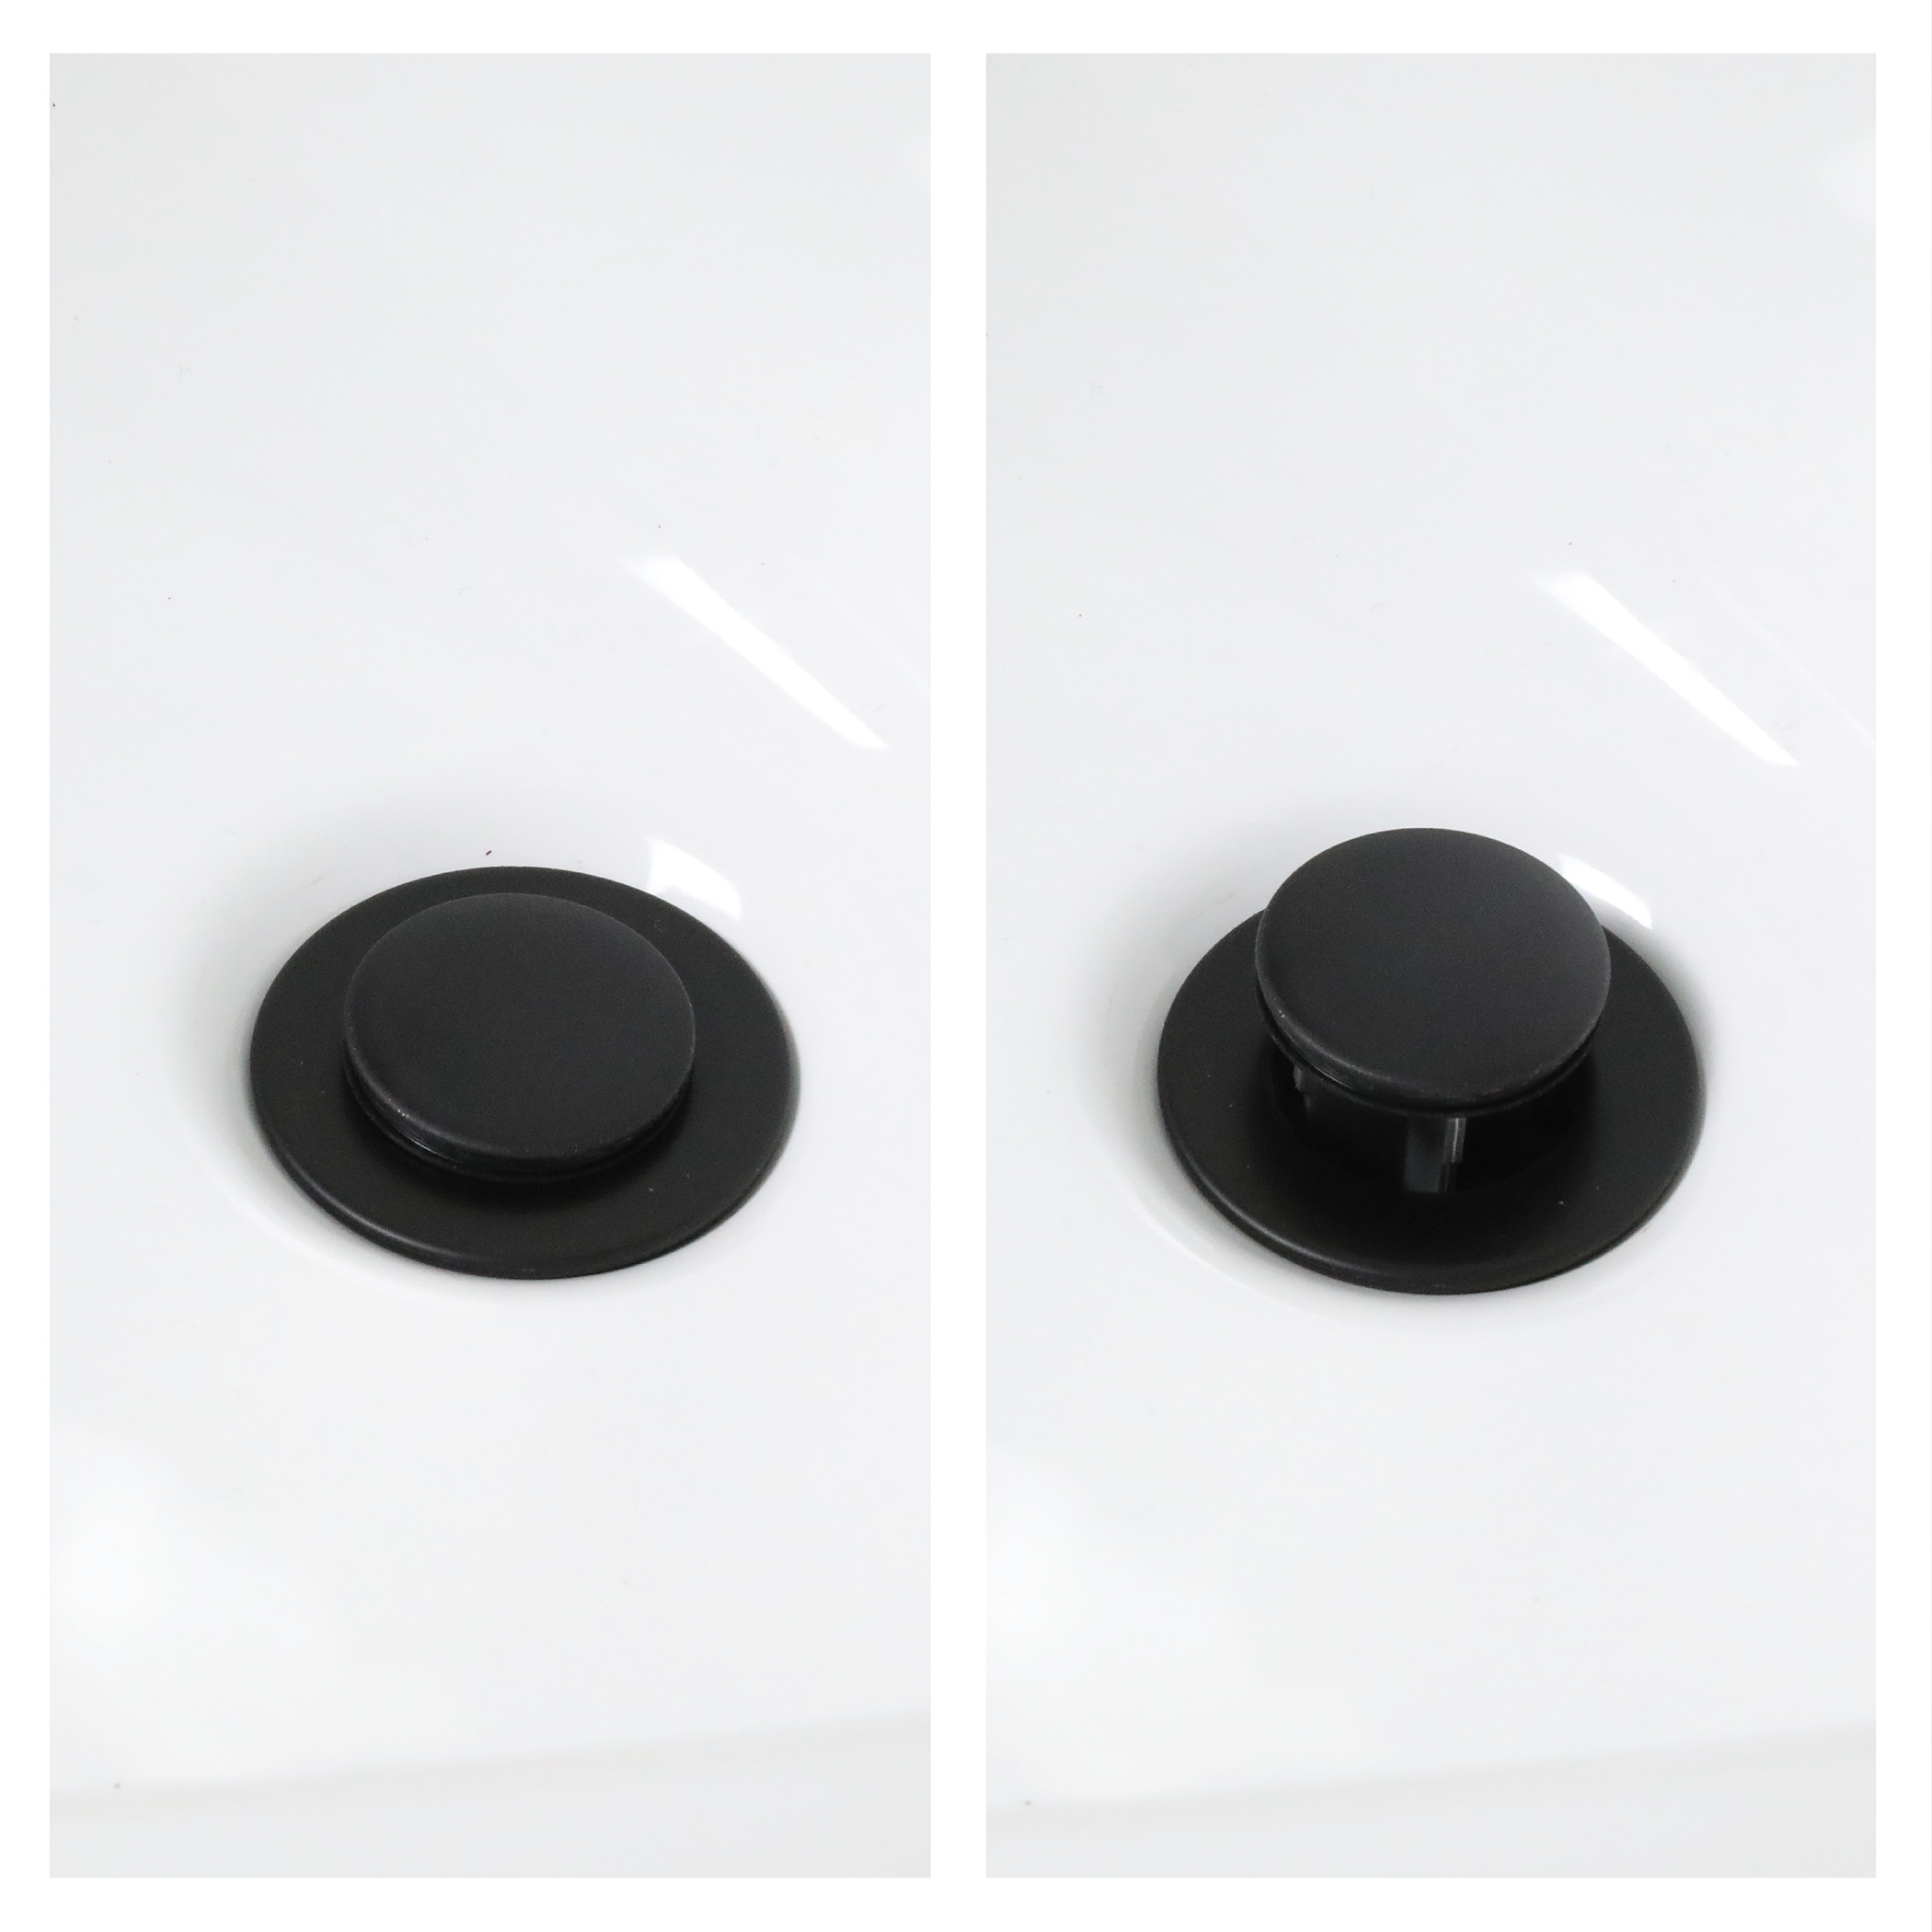 Bathroom Pop-up Stopper Replacement for Pop-up Drain Assemblies in Matte Black